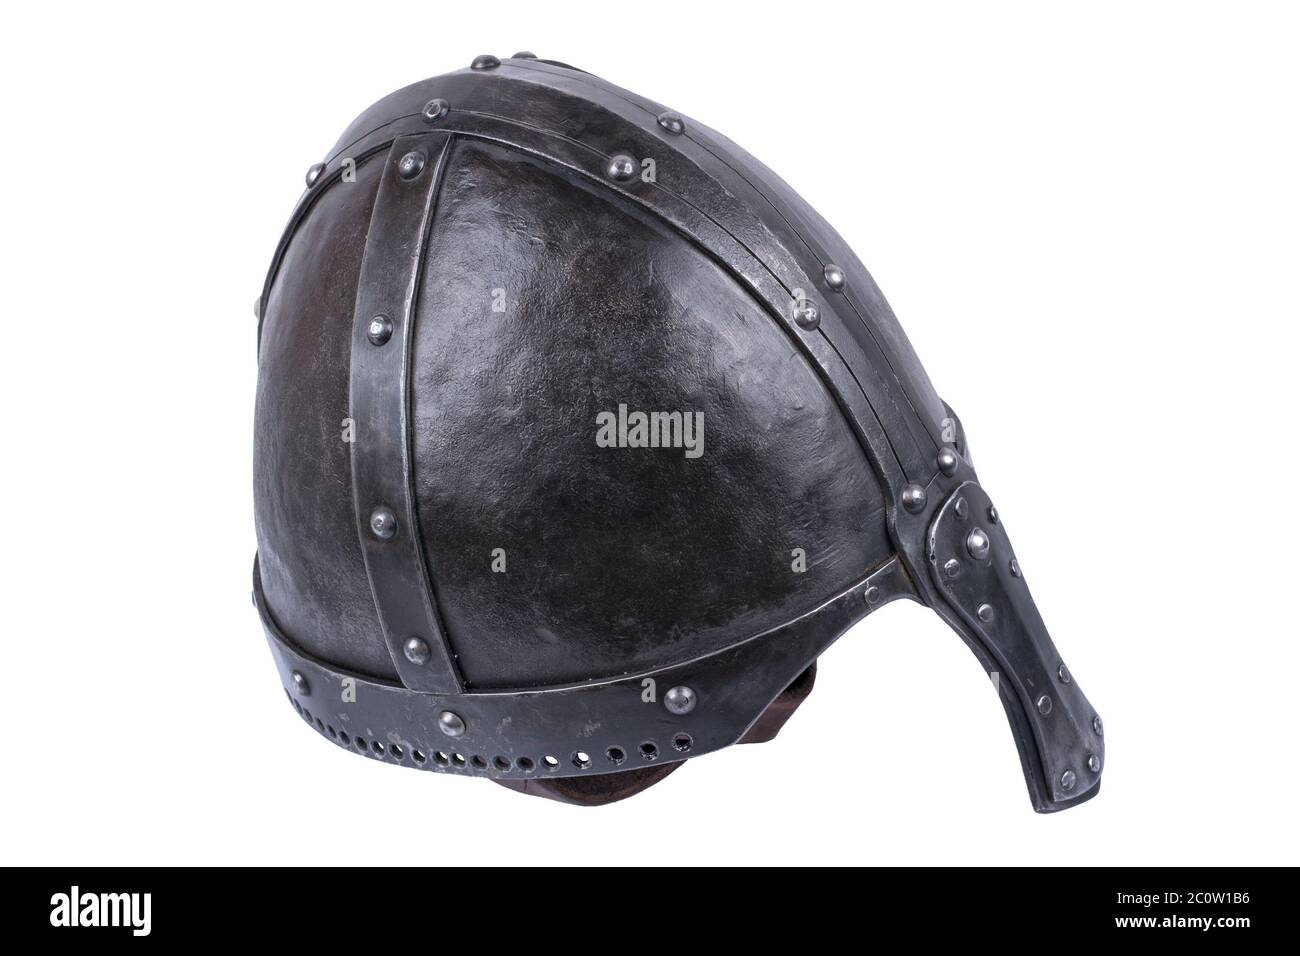 Heavy duty conical norman helmet on a white background Stock Photo